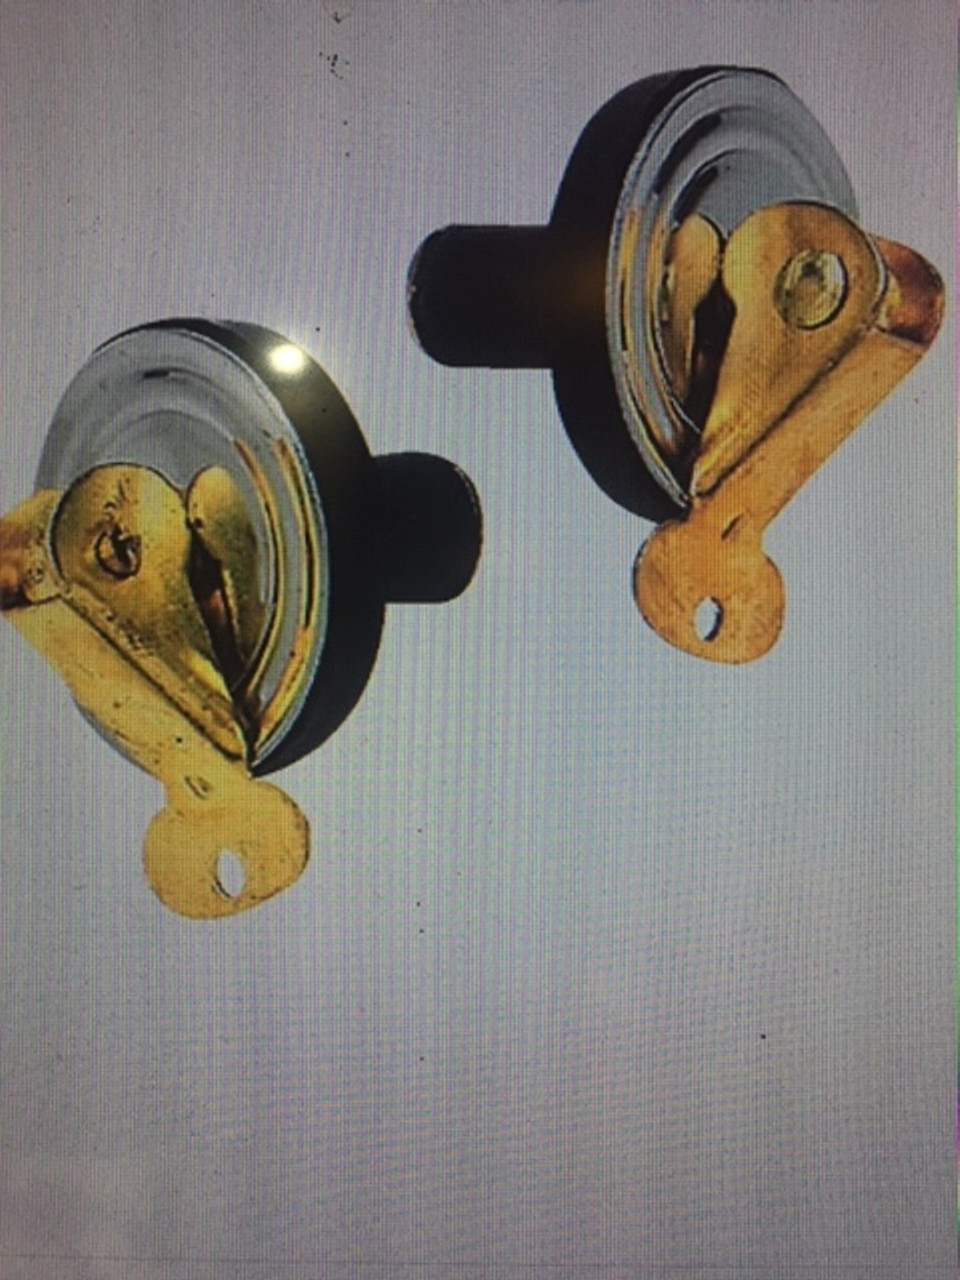 3/4" For use in livewells or baitwells. Stainless steel top and bottom plate. Brass can. Neoprene body. 2 per card.